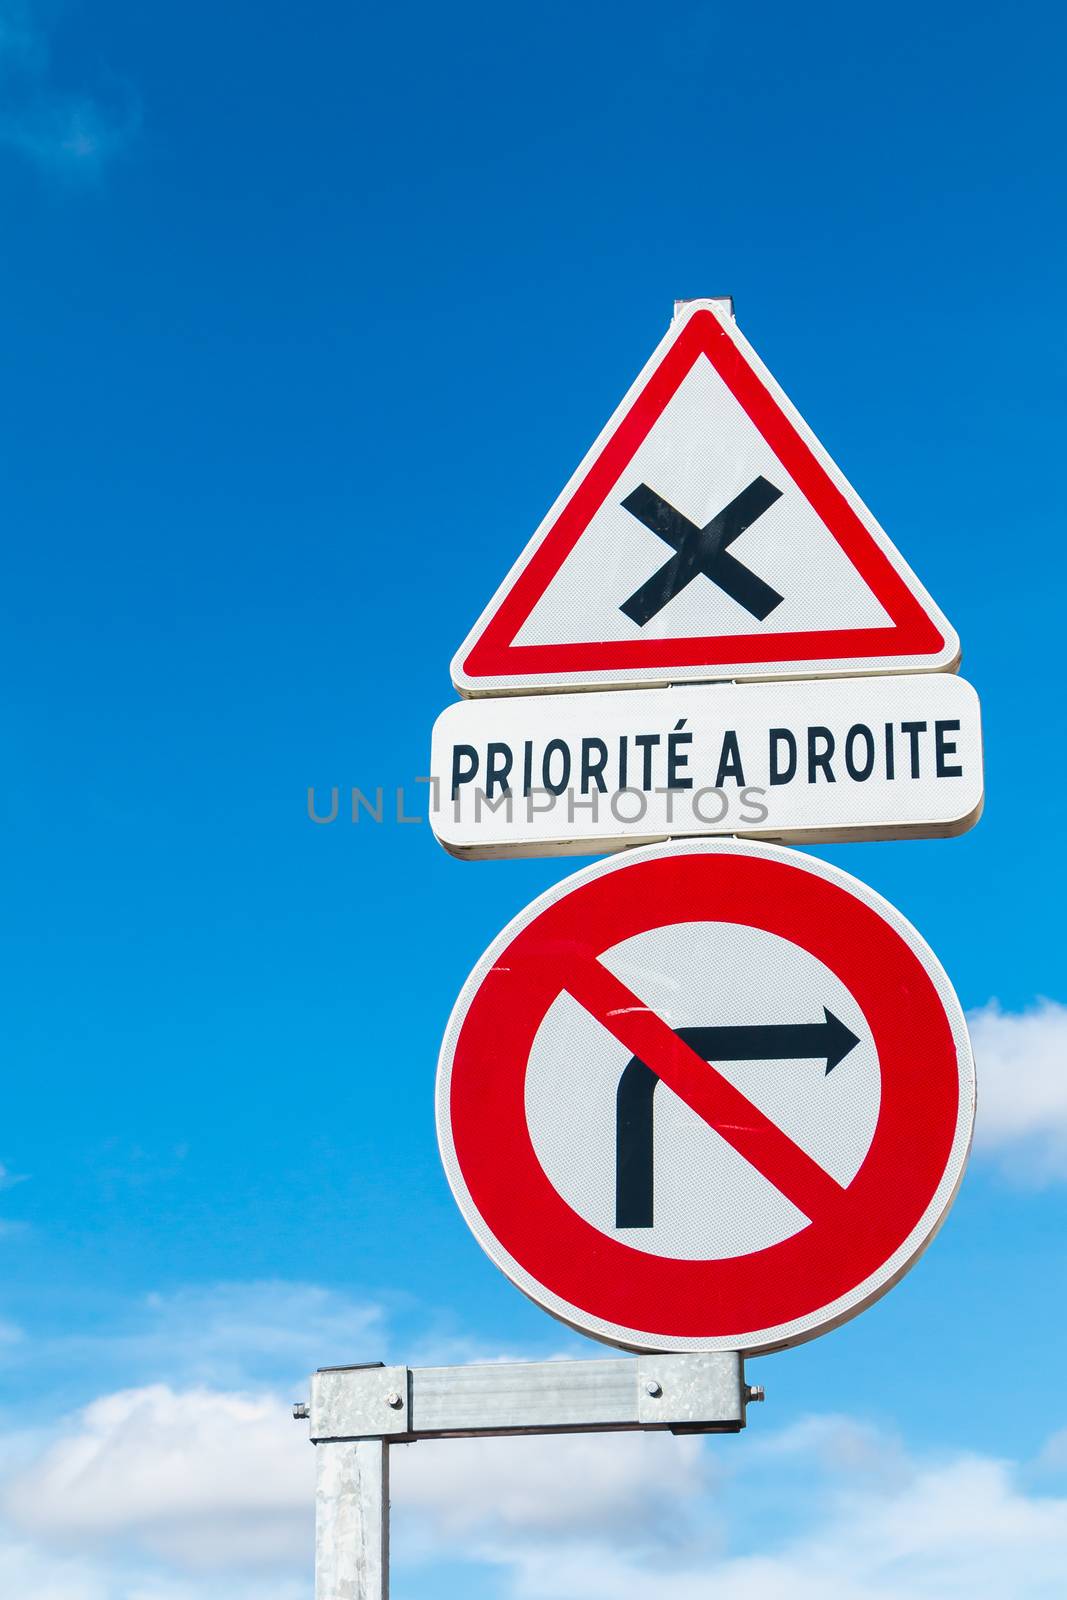 in the street, french sign prohibiting a right turn and the priority right